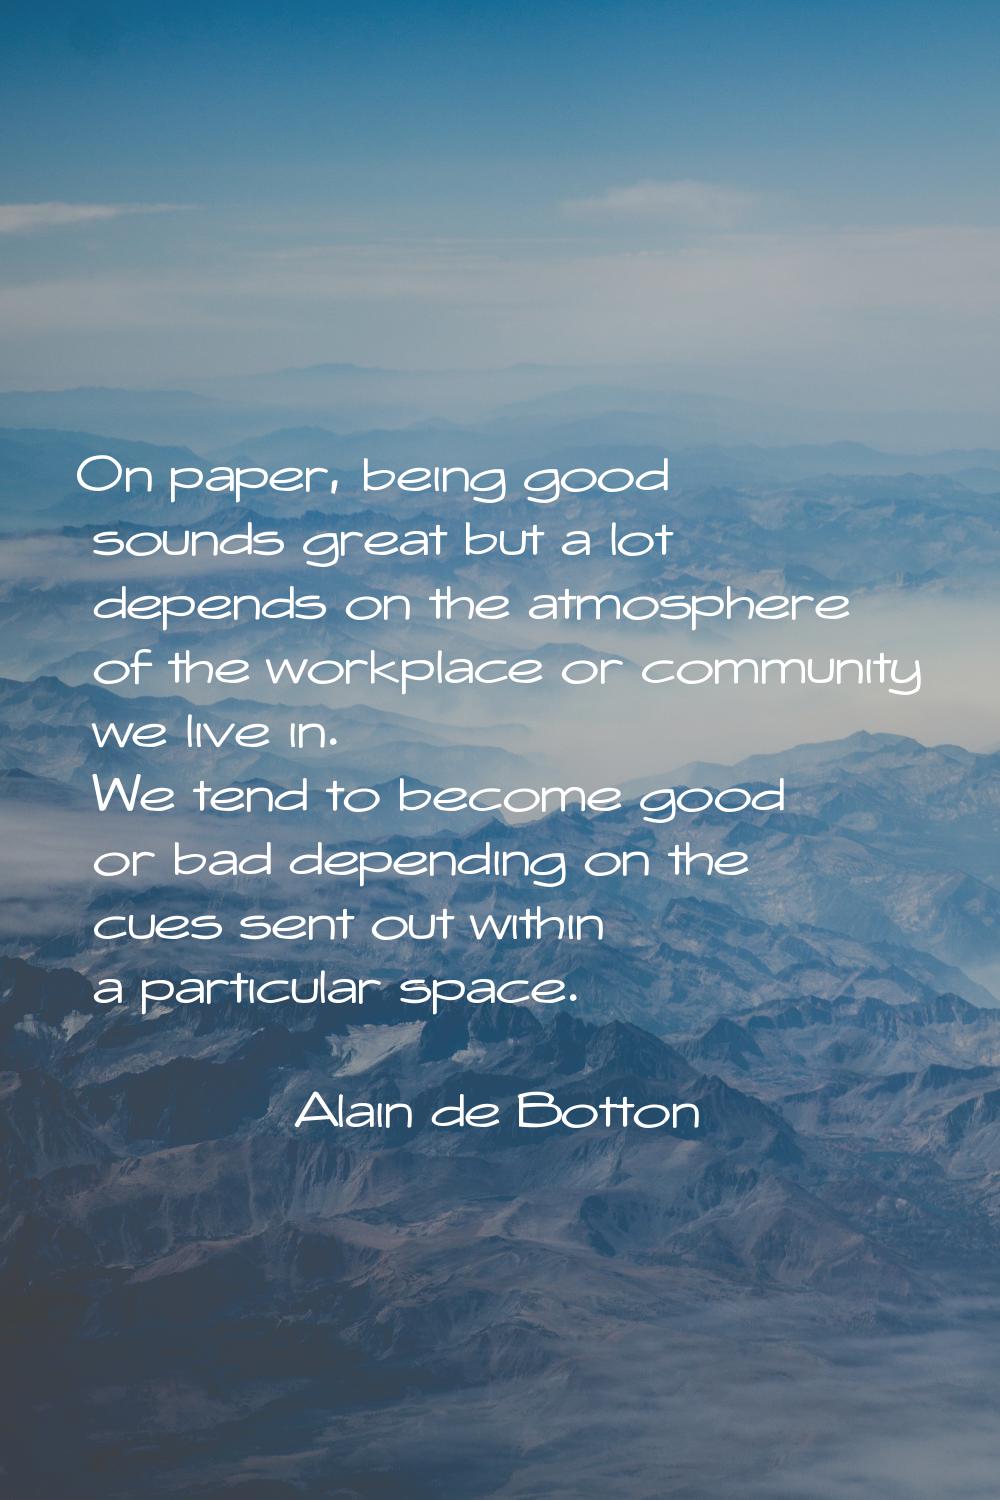 On paper, being good sounds great but a lot depends on the atmosphere of the workplace or community